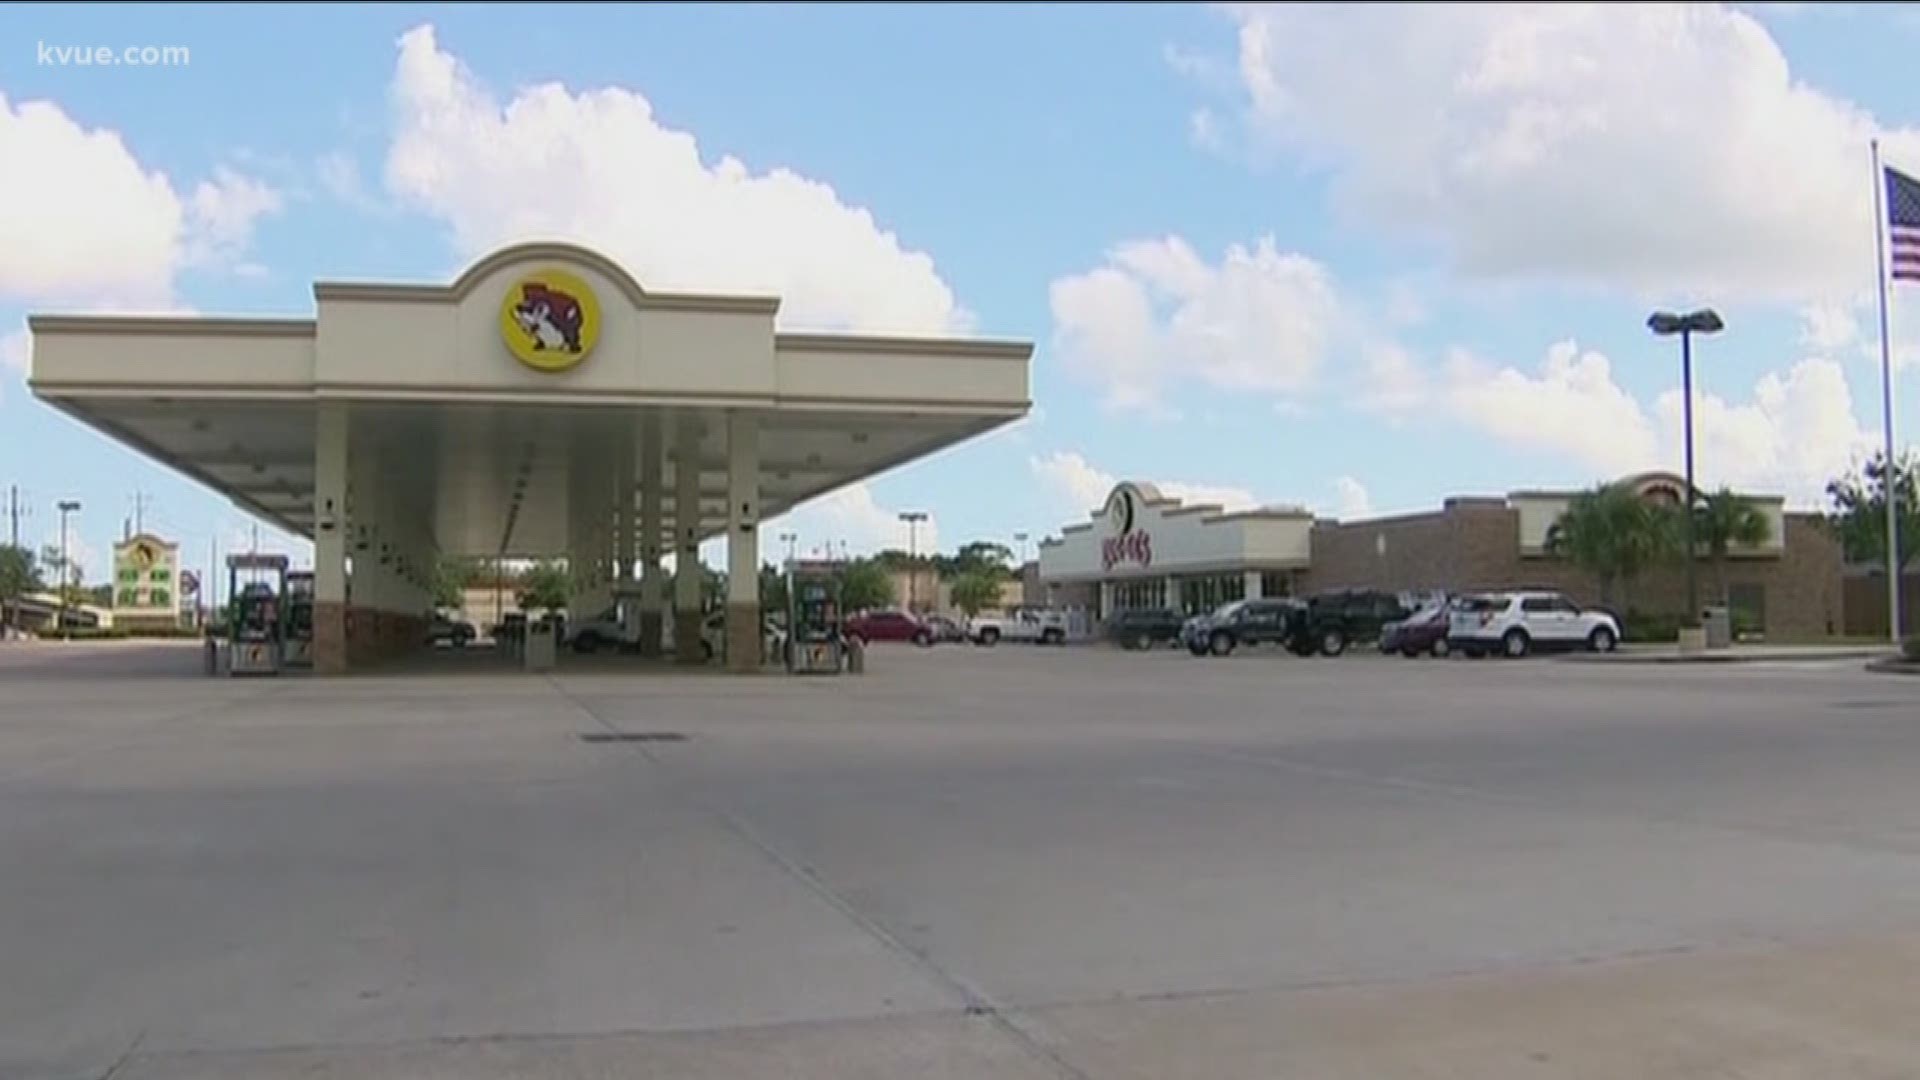 A local travel blogger is getting some attention after mapping out a special road trip that stops at every Buc-Ee's location.